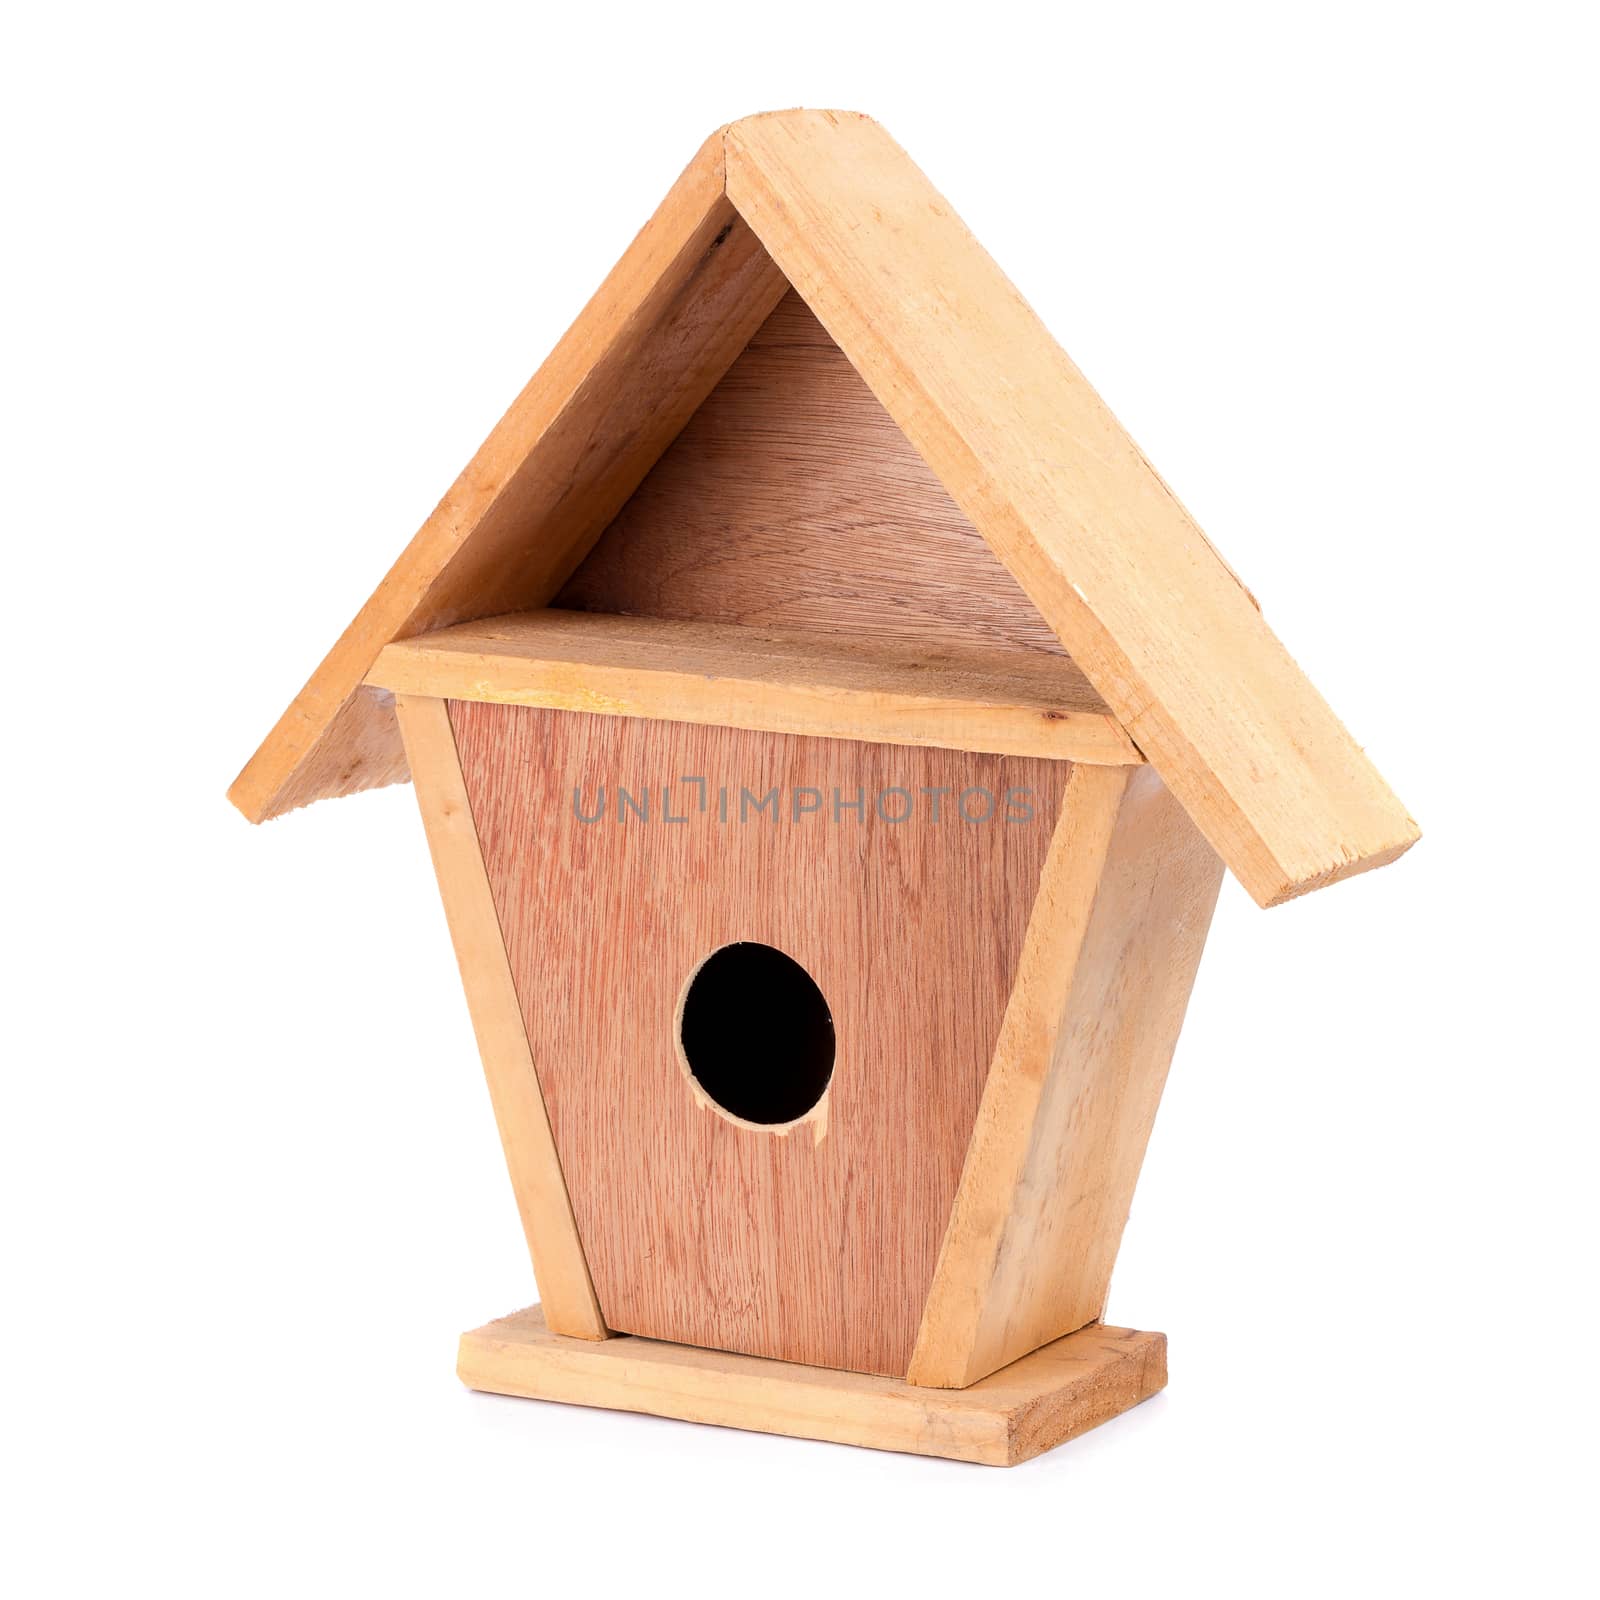 Wooden Bird House Isolated on White background by kaiskynet